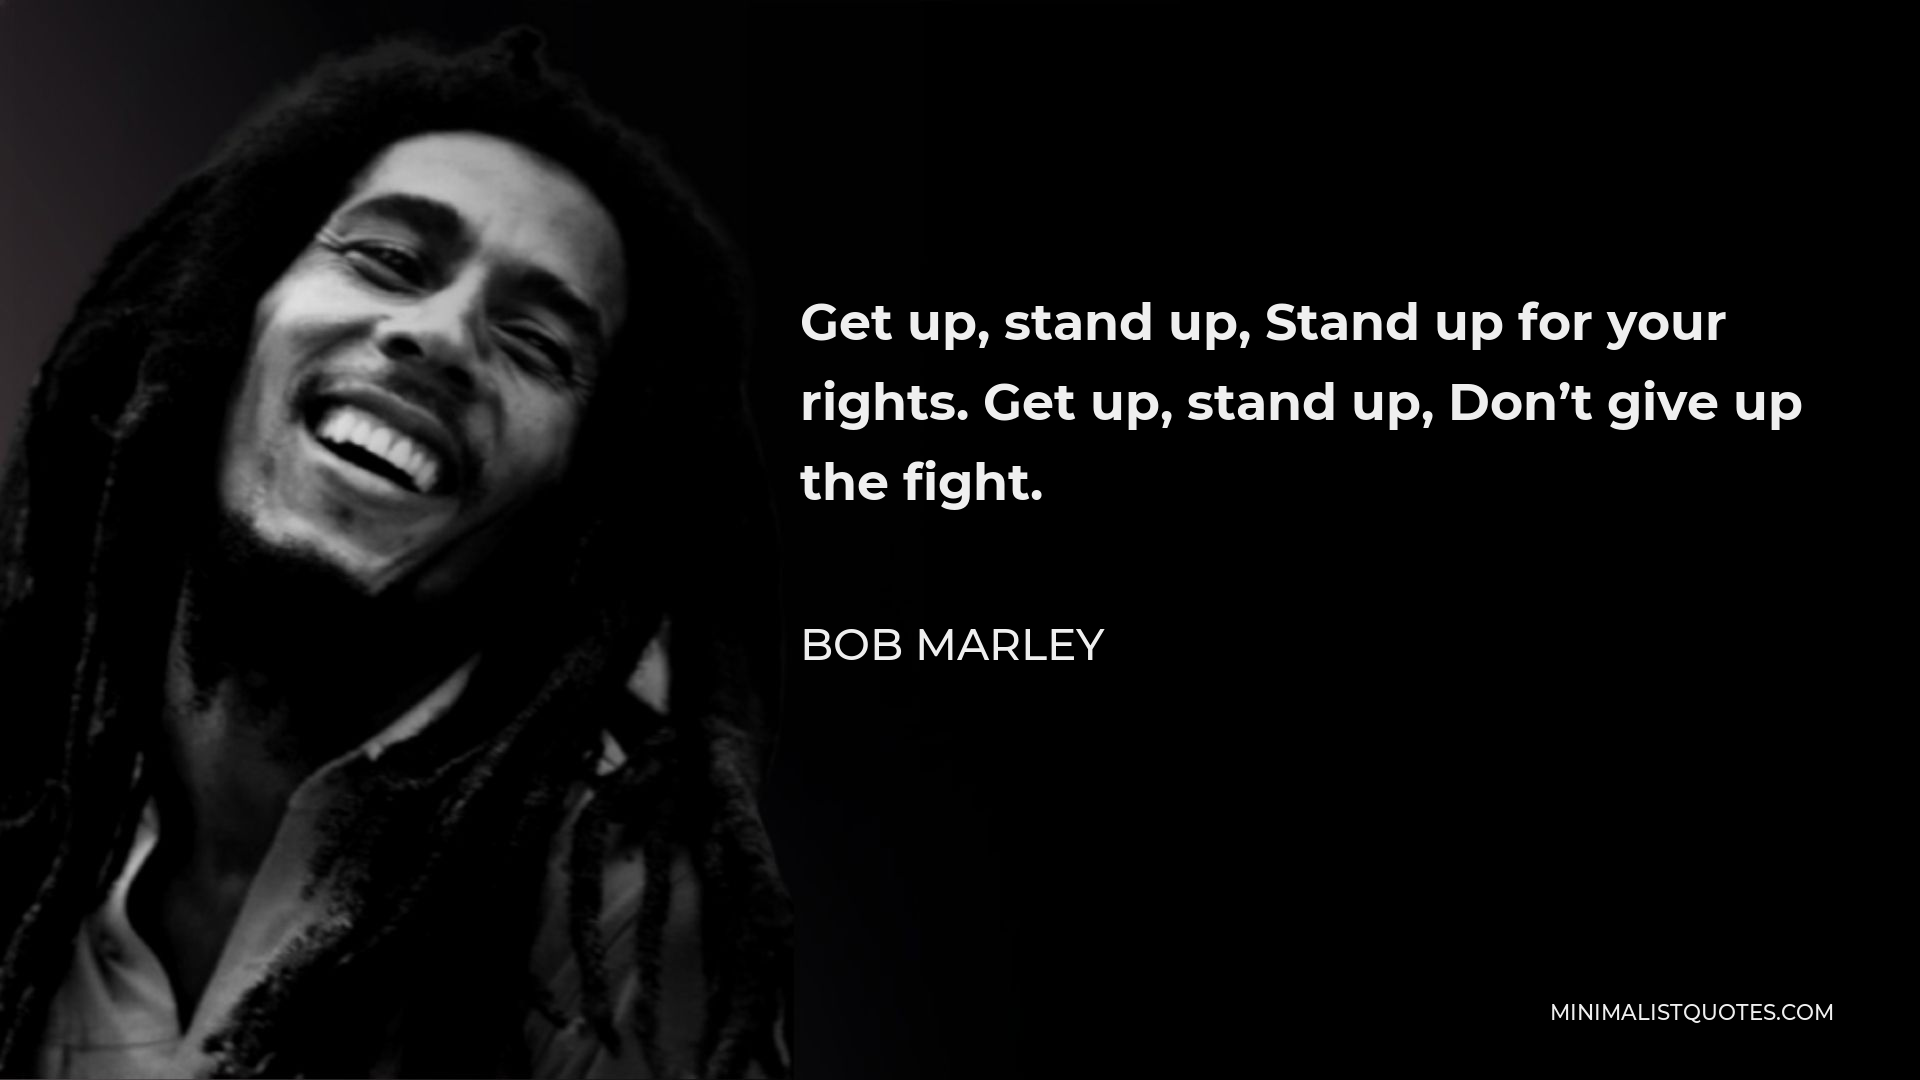 Bob Marley Quote - Get up, stand up, Stand up for your rights. Get up, stand up, Don’t give up the fight.